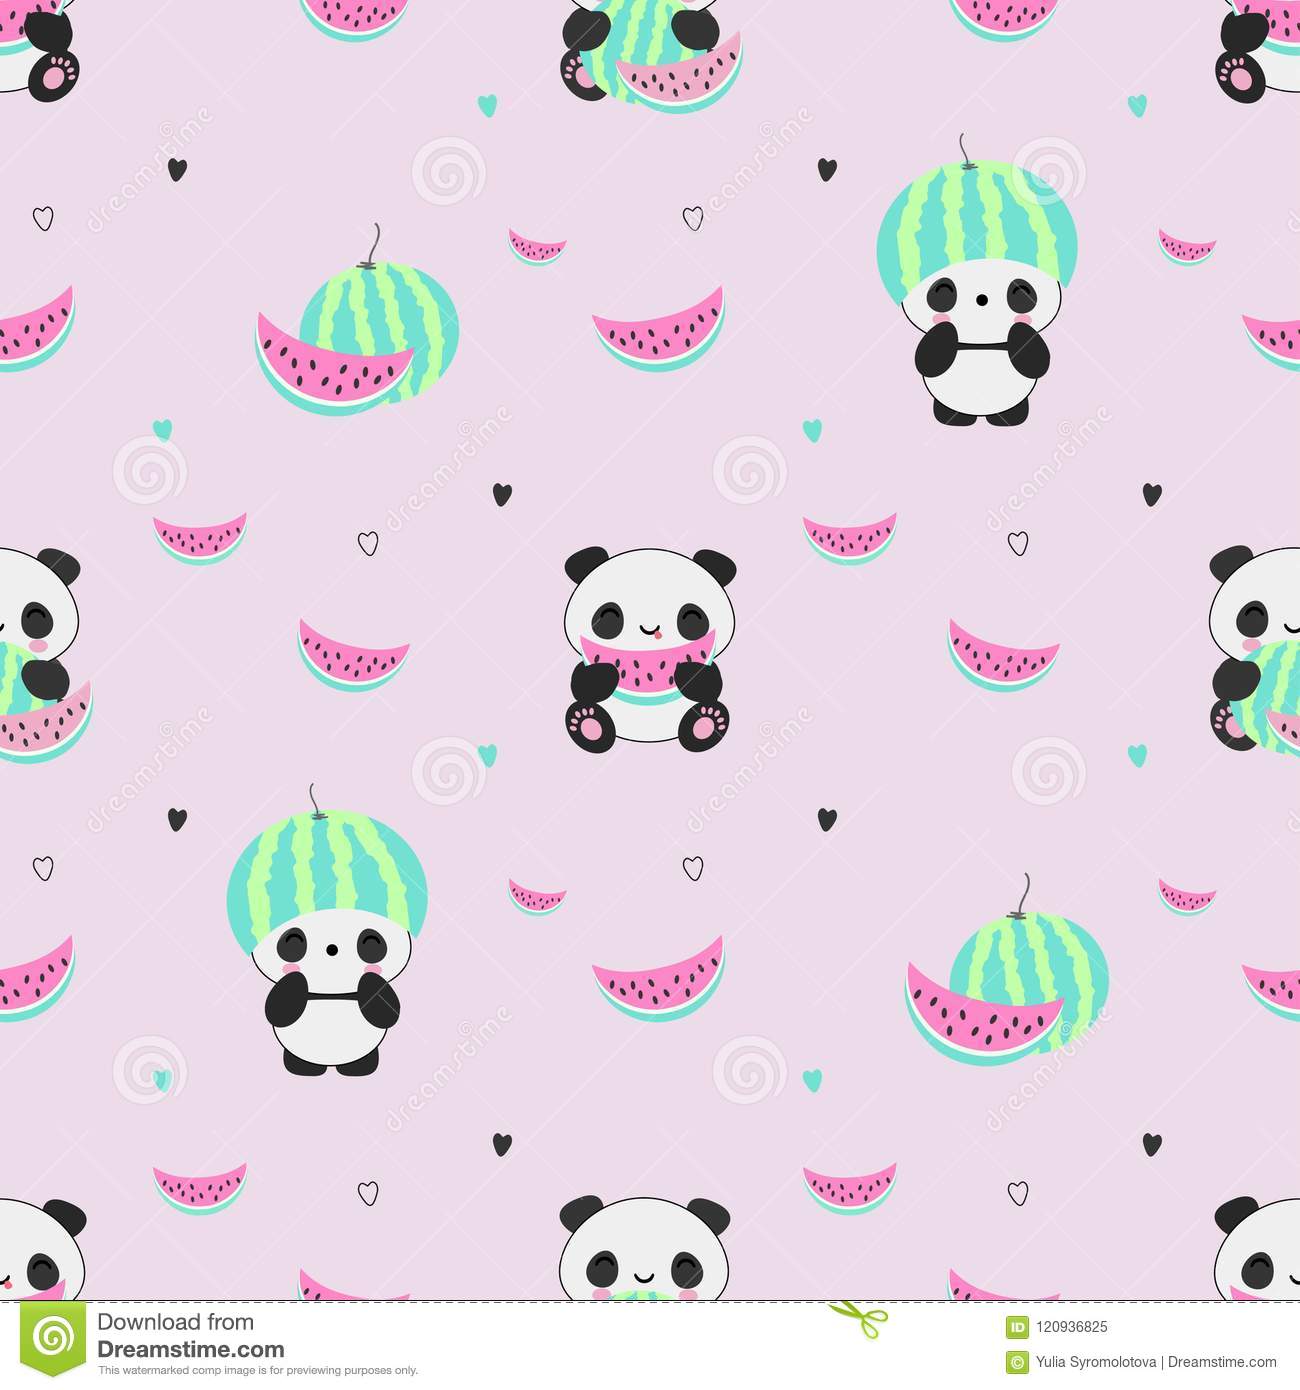 Seamless vector pattern with cute kawaii panda bears and watermelons on nice pink background stock illustration